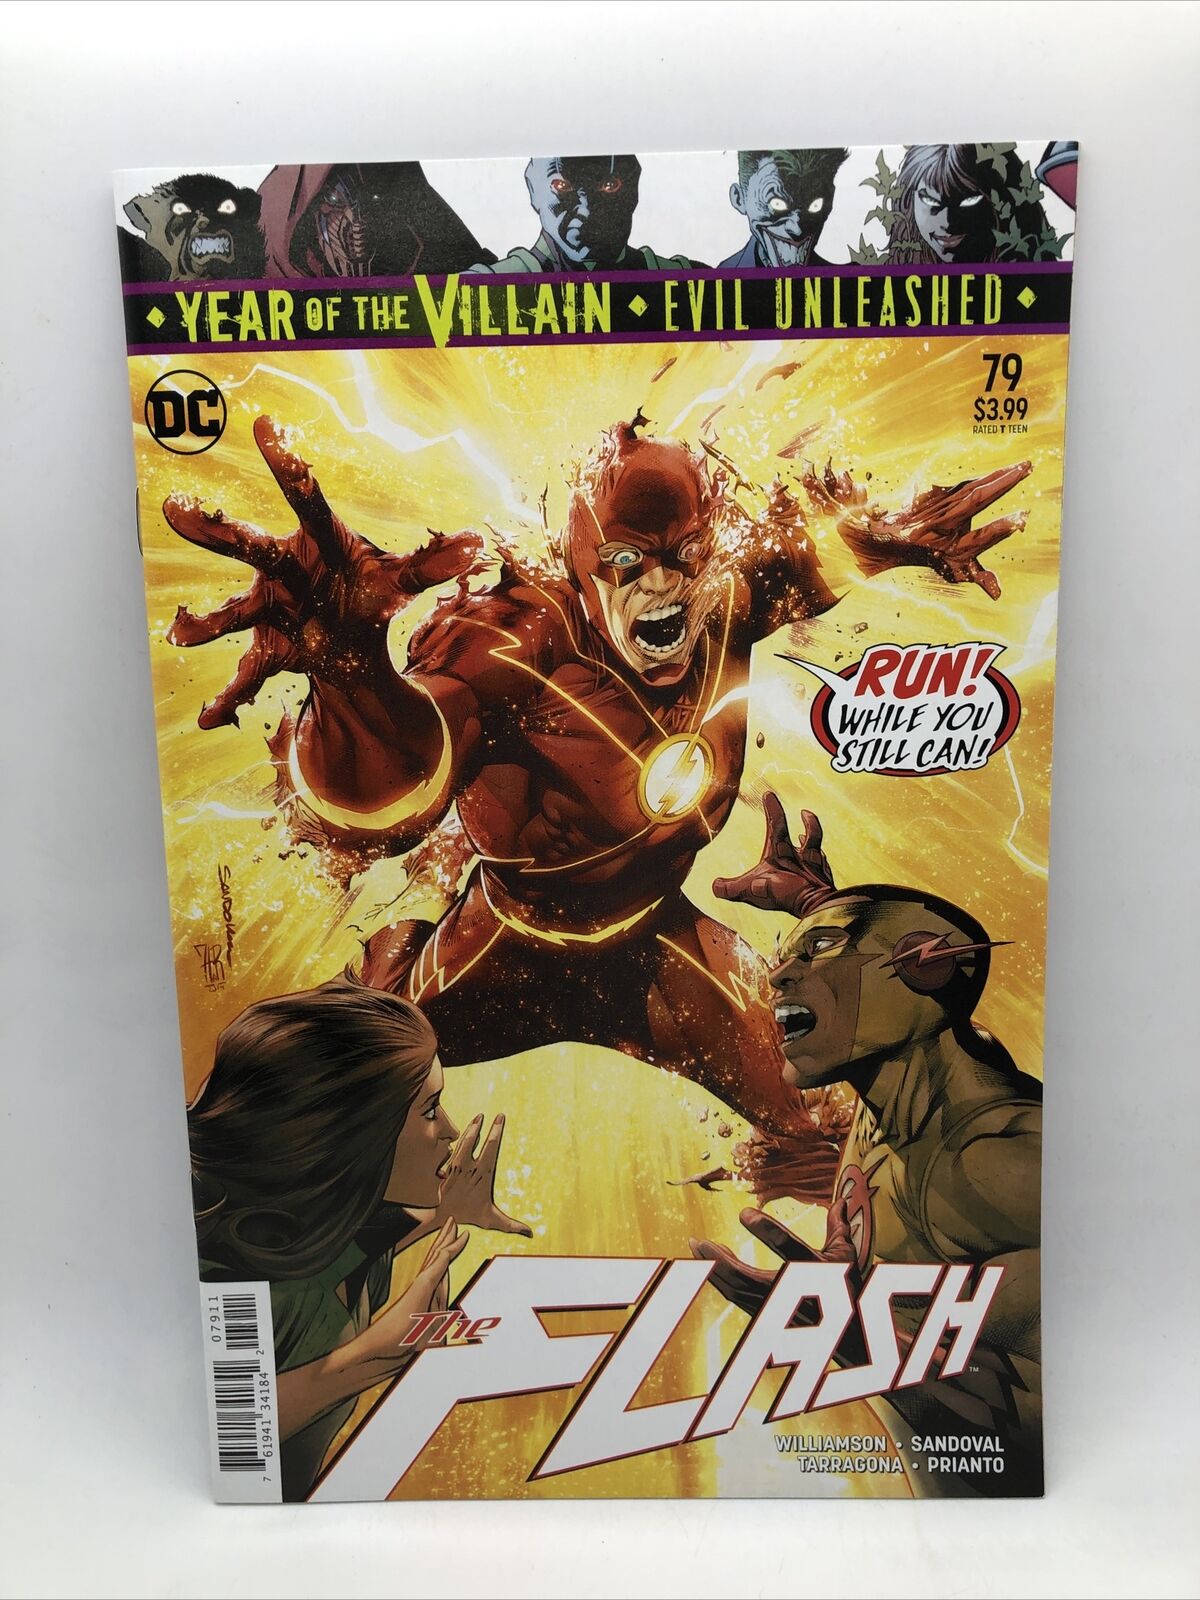 Flash (2016 5th Series) #79A...Published Nov 2019 by DC